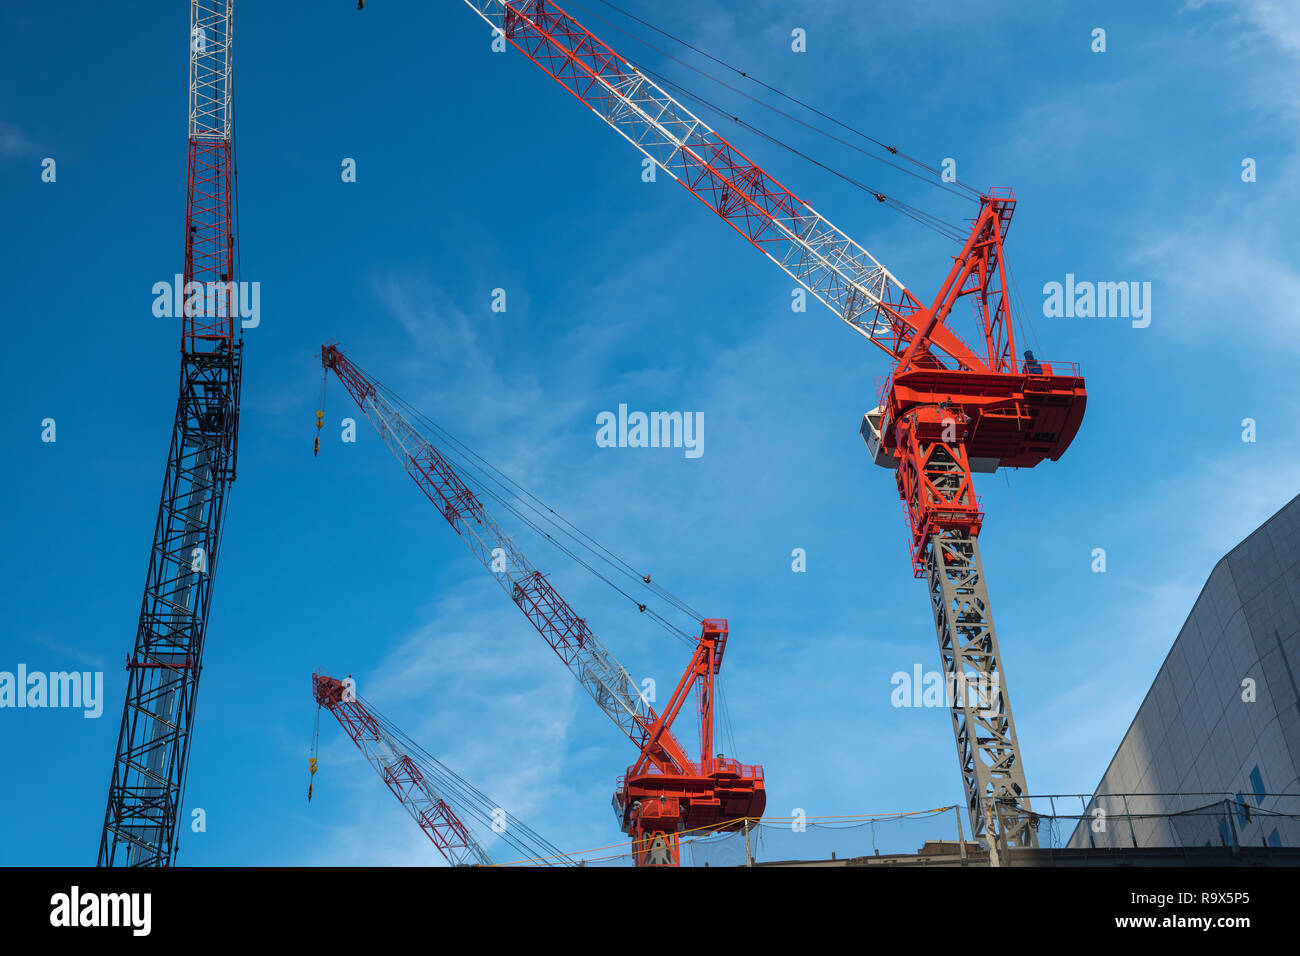 On a construction site there are several lifting cranes. Stock Photo